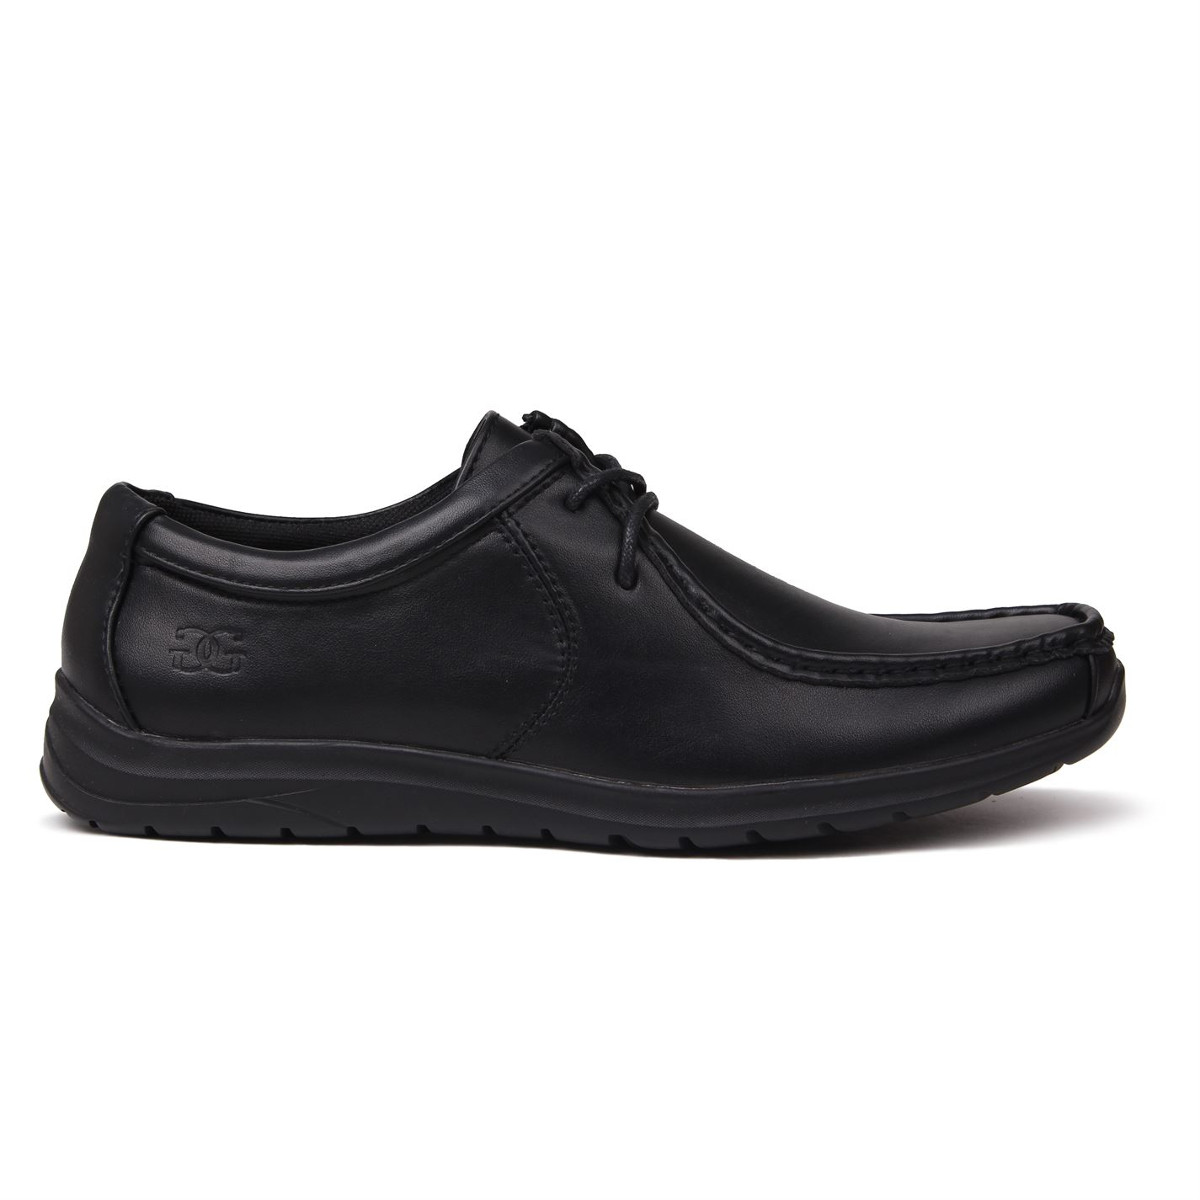 Giorgio Men's Bexley Lace-Up Casual Shoes - Black, 8